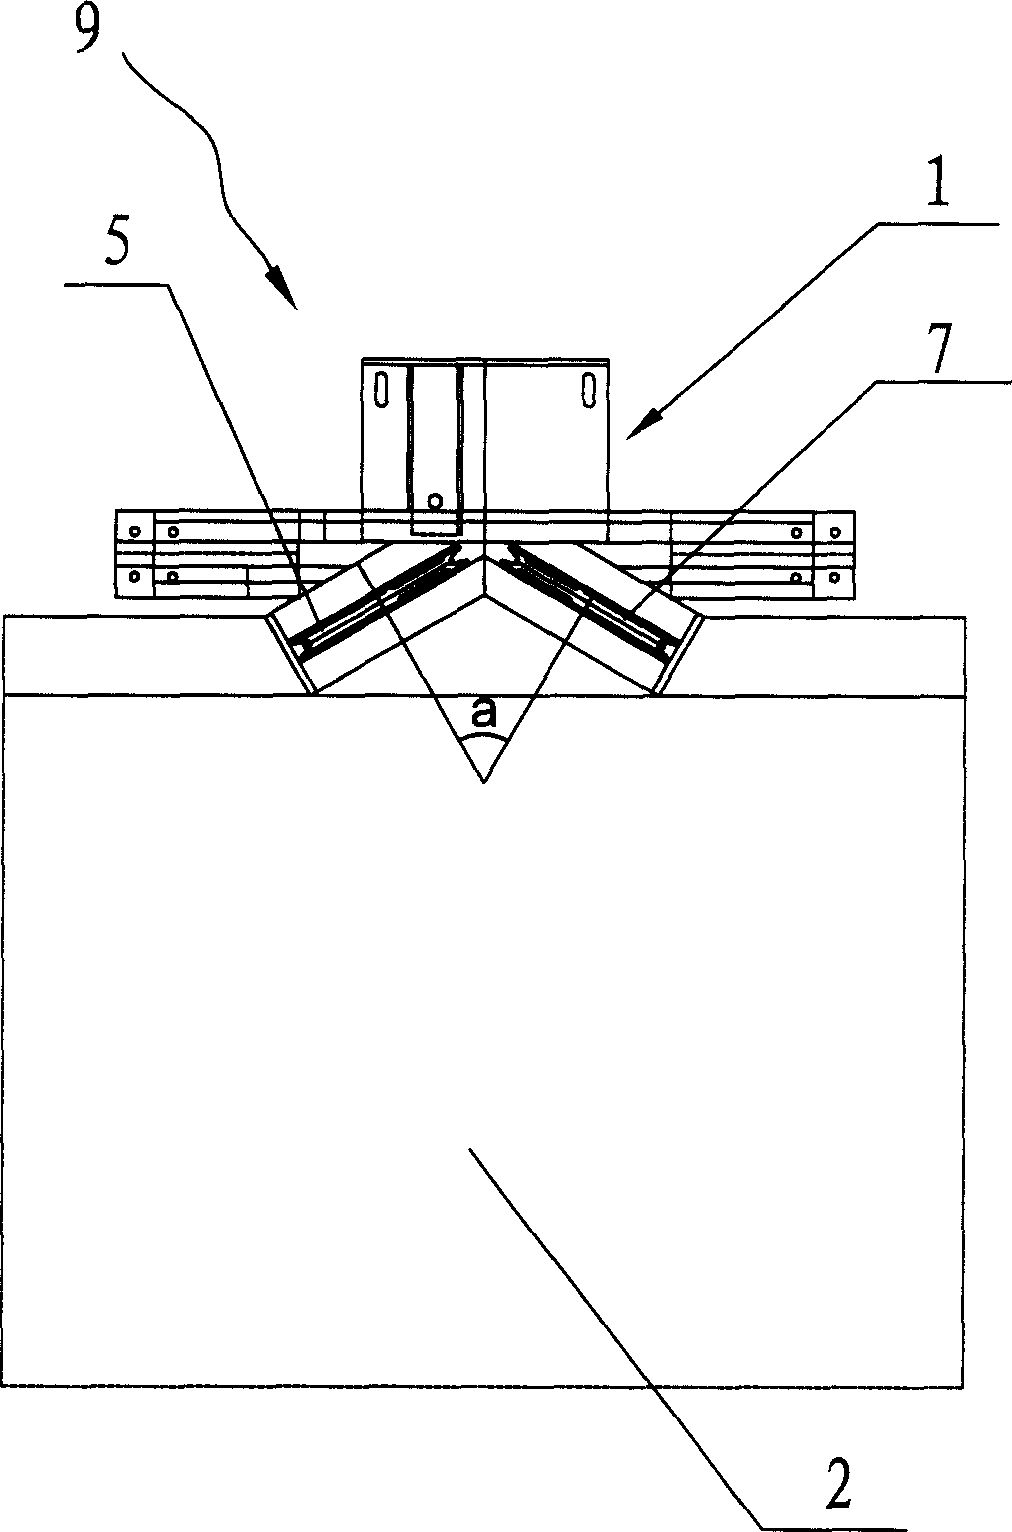 Lift dragging and driving mechanism